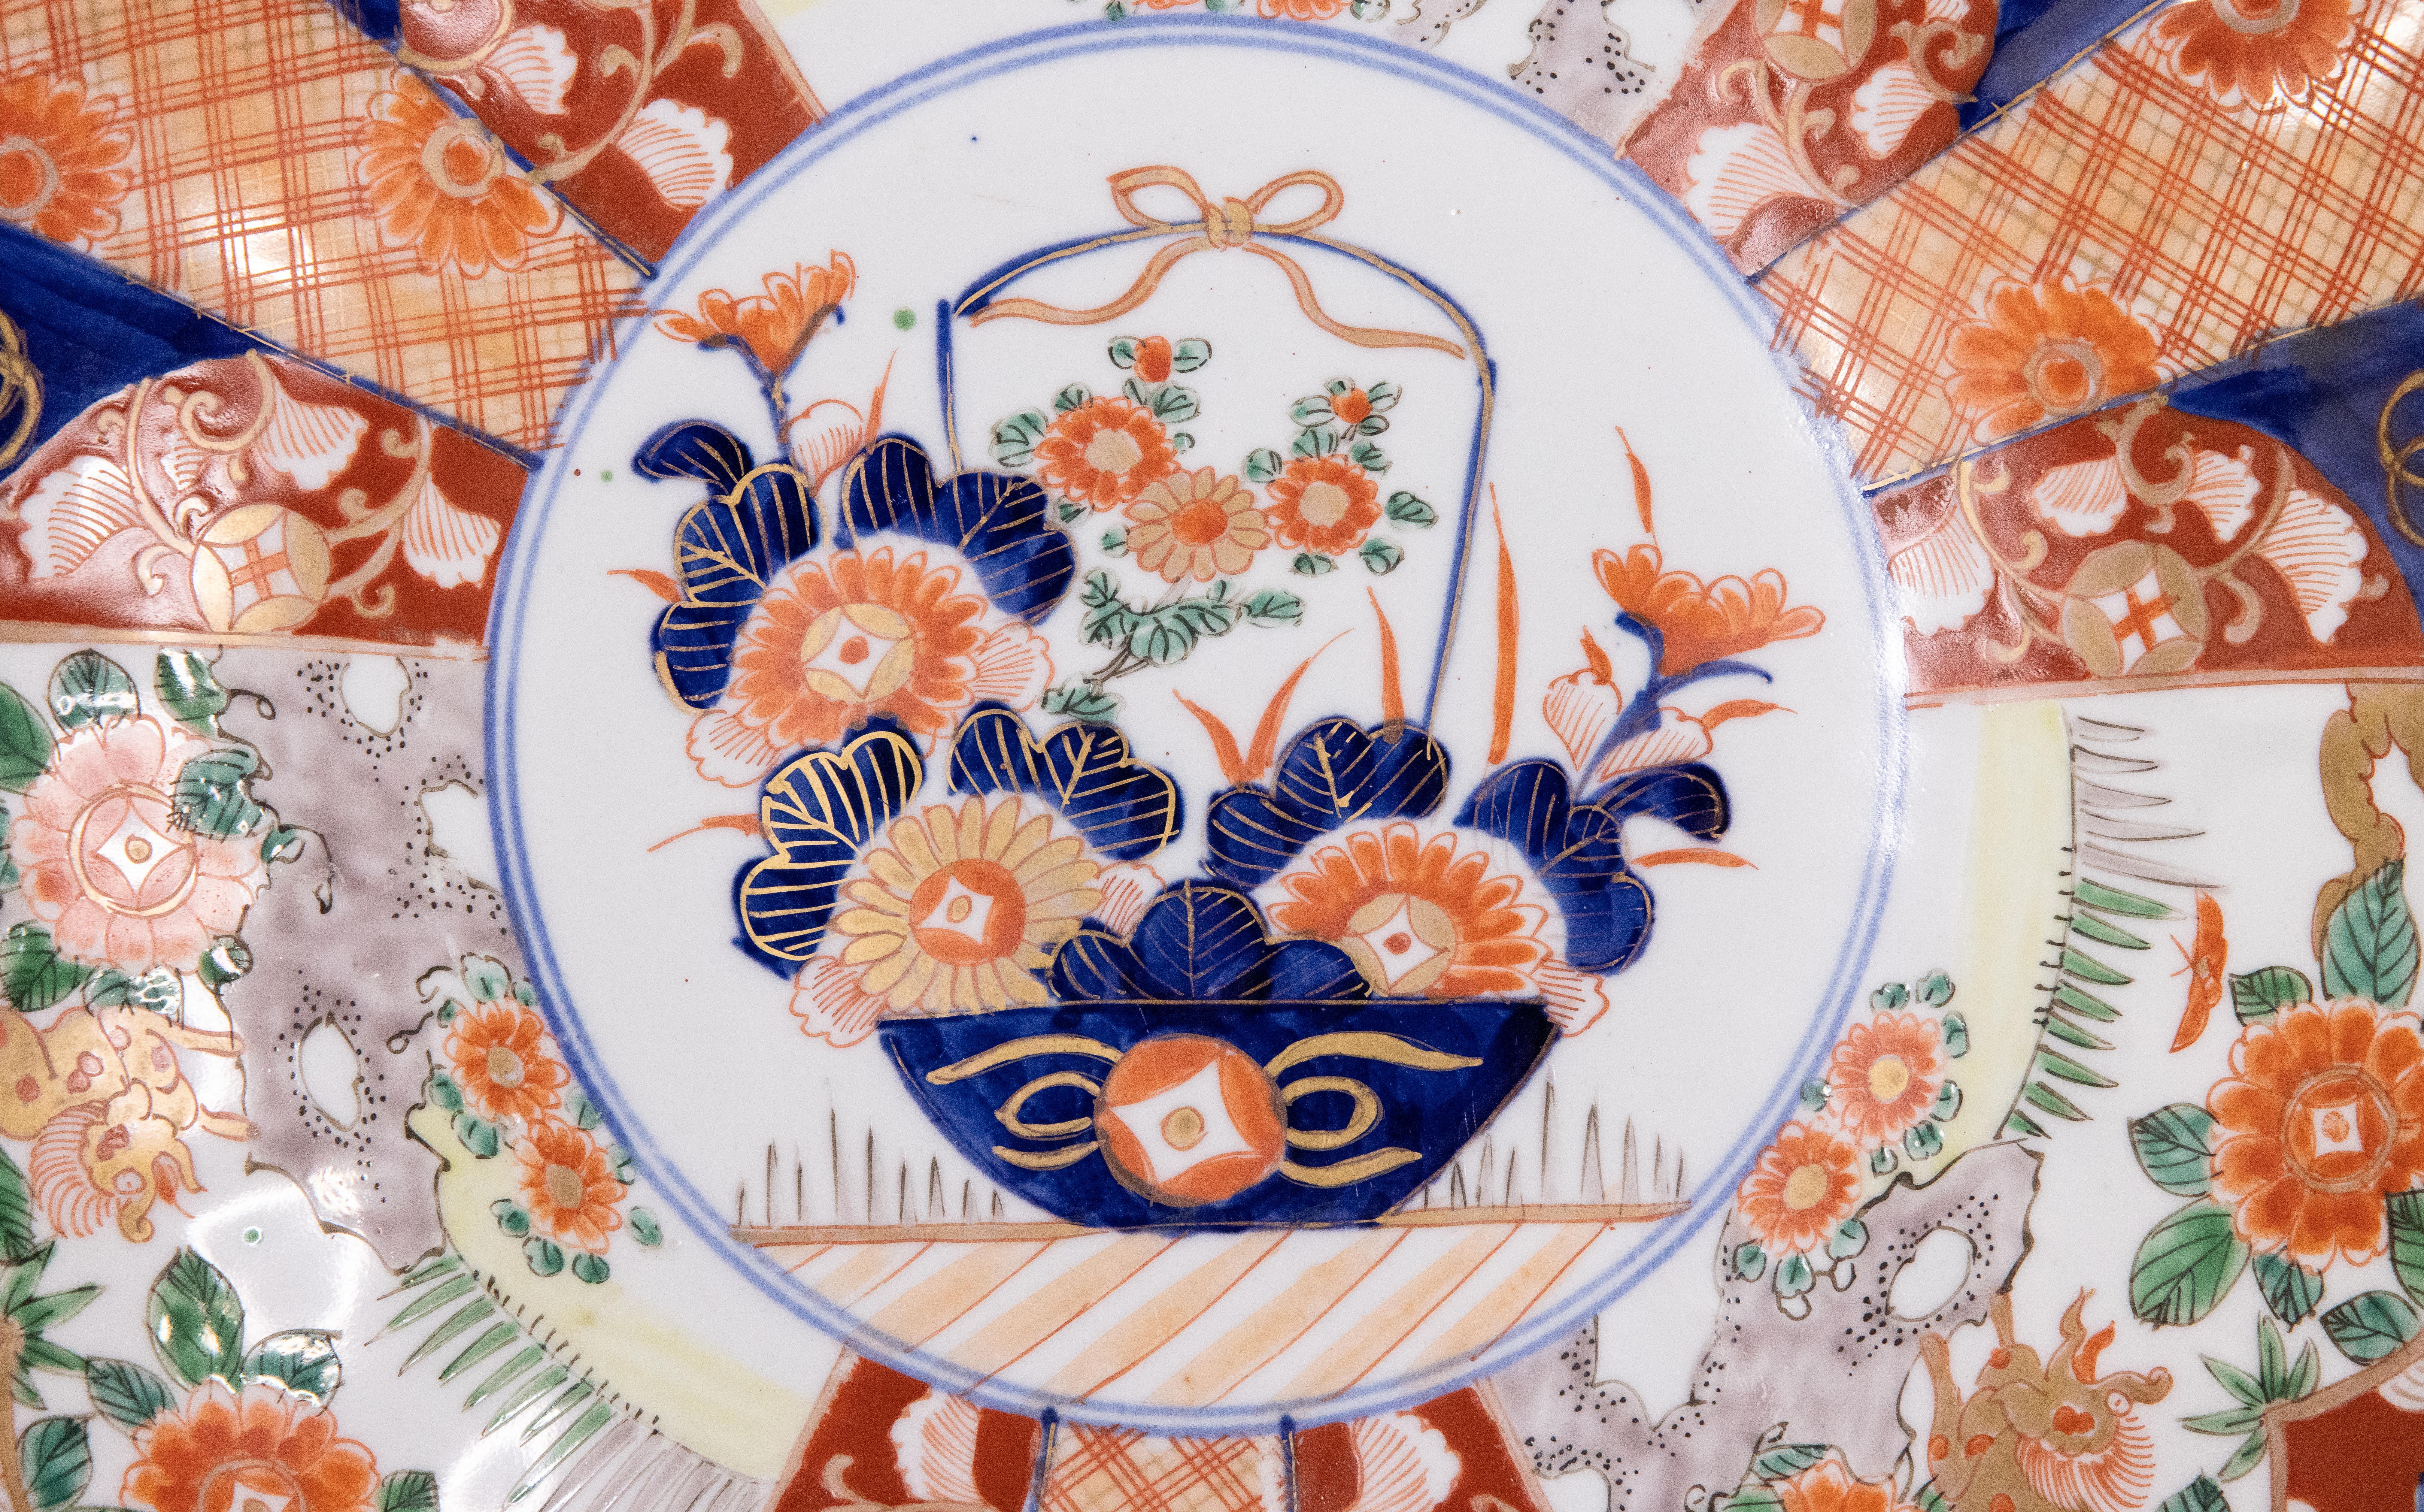 A gorgeous 19th-Century Japanese Imari porcelain charger with a hand painted floral design in the traditional Imari colors. This fine large plate has lovely scalloped edges and is quite heavy, weighing over 3 lbs. It's in excellent condition and